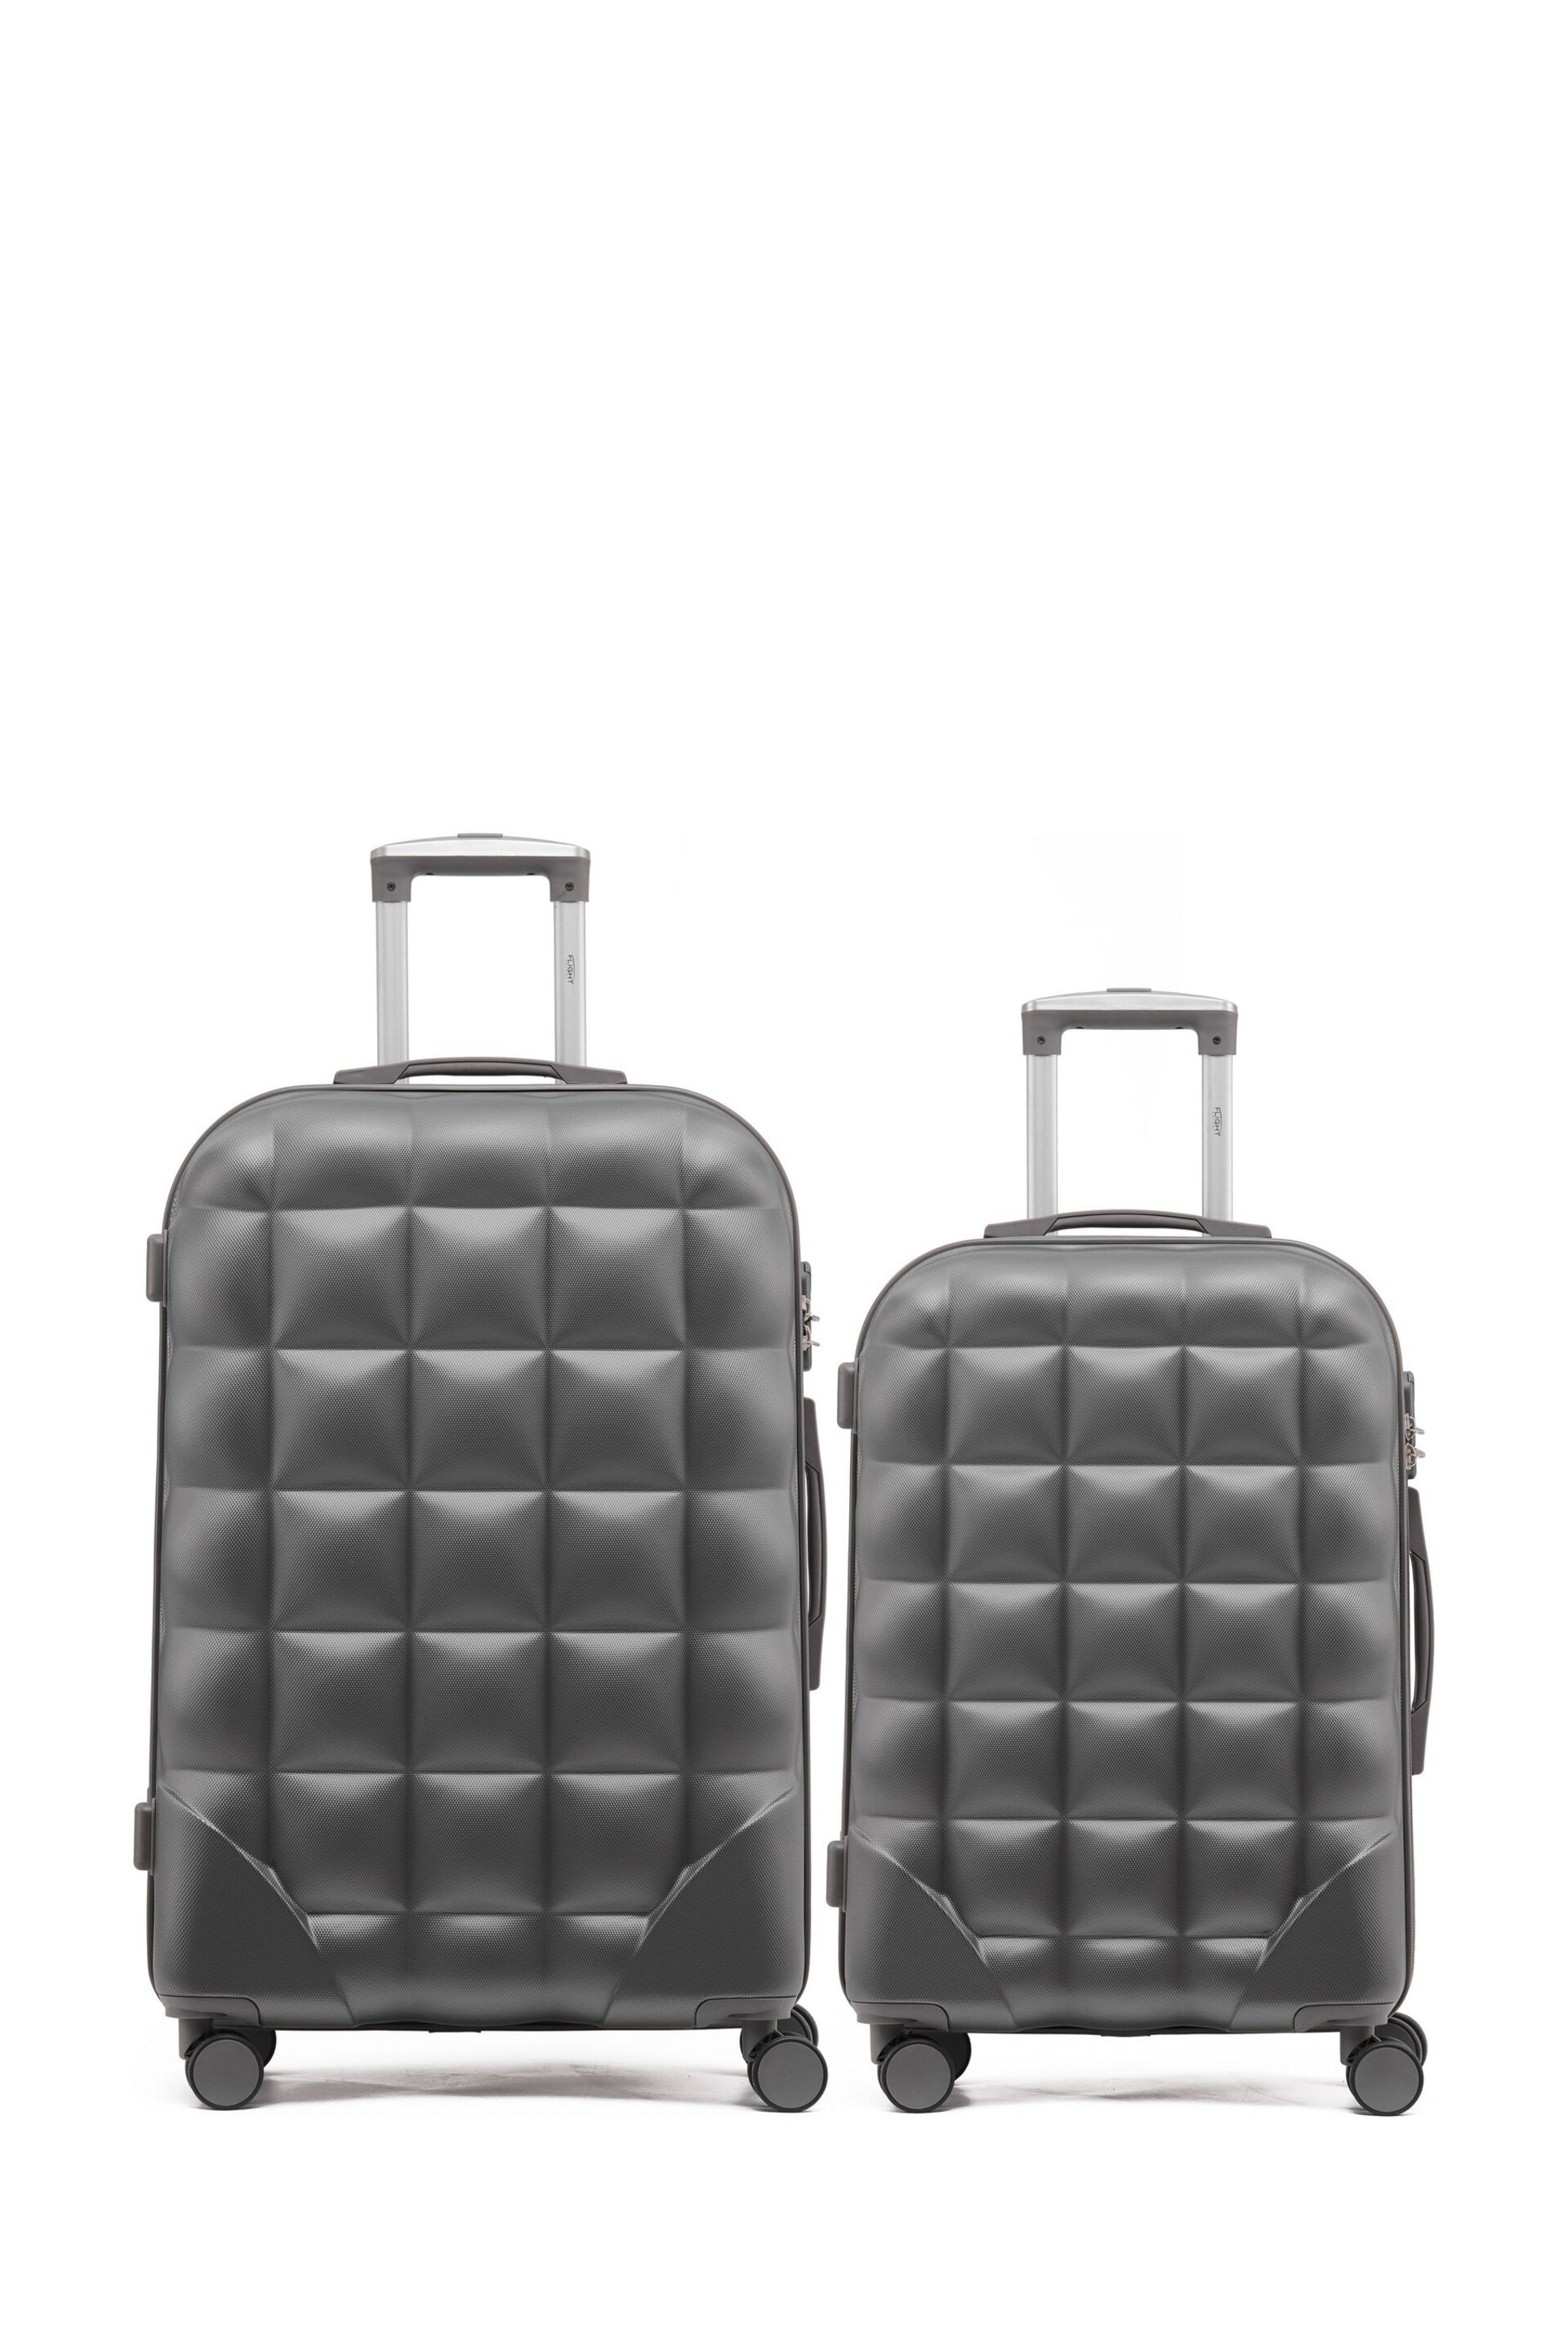 Flight Knight Medium Check-In & Small Carry-On Bubble Hardcase Travel Black Luggage Set of 2 - Image 1 of 5